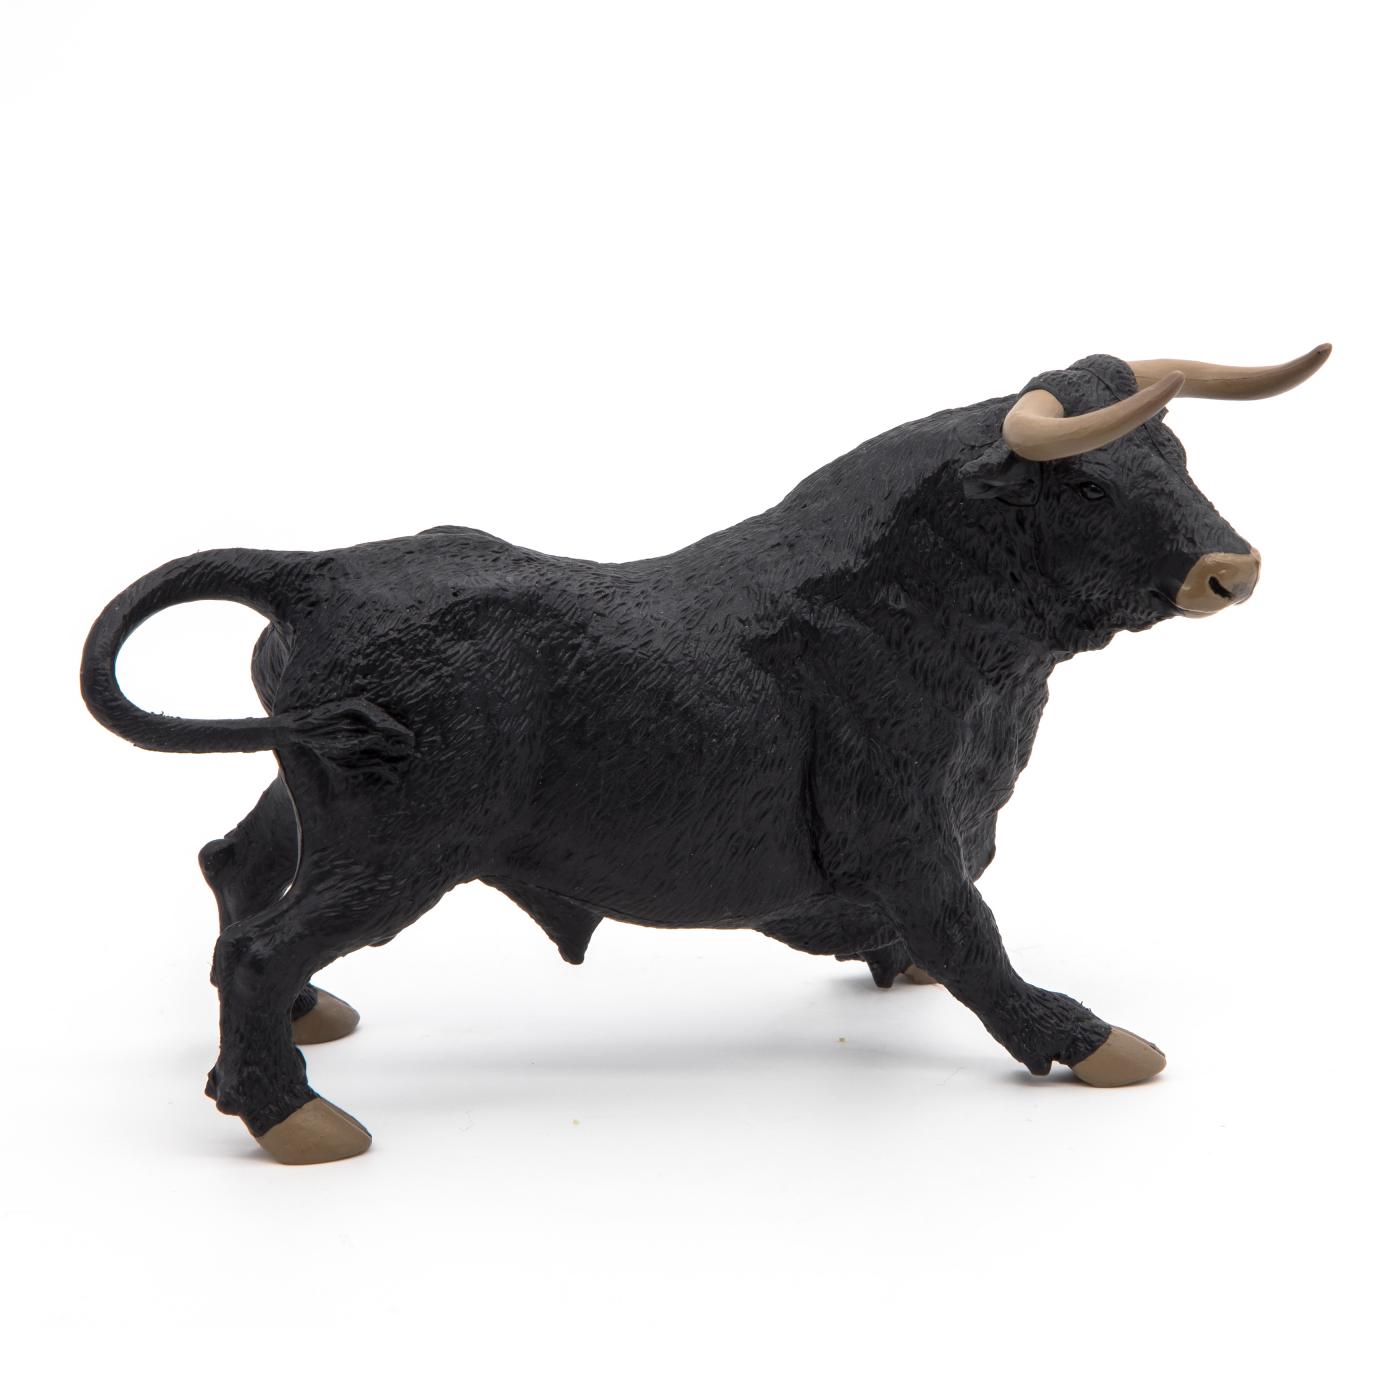 Papo Andalusian Fighting Bull Figure Wildlife Toy Replica 51050 NEW 